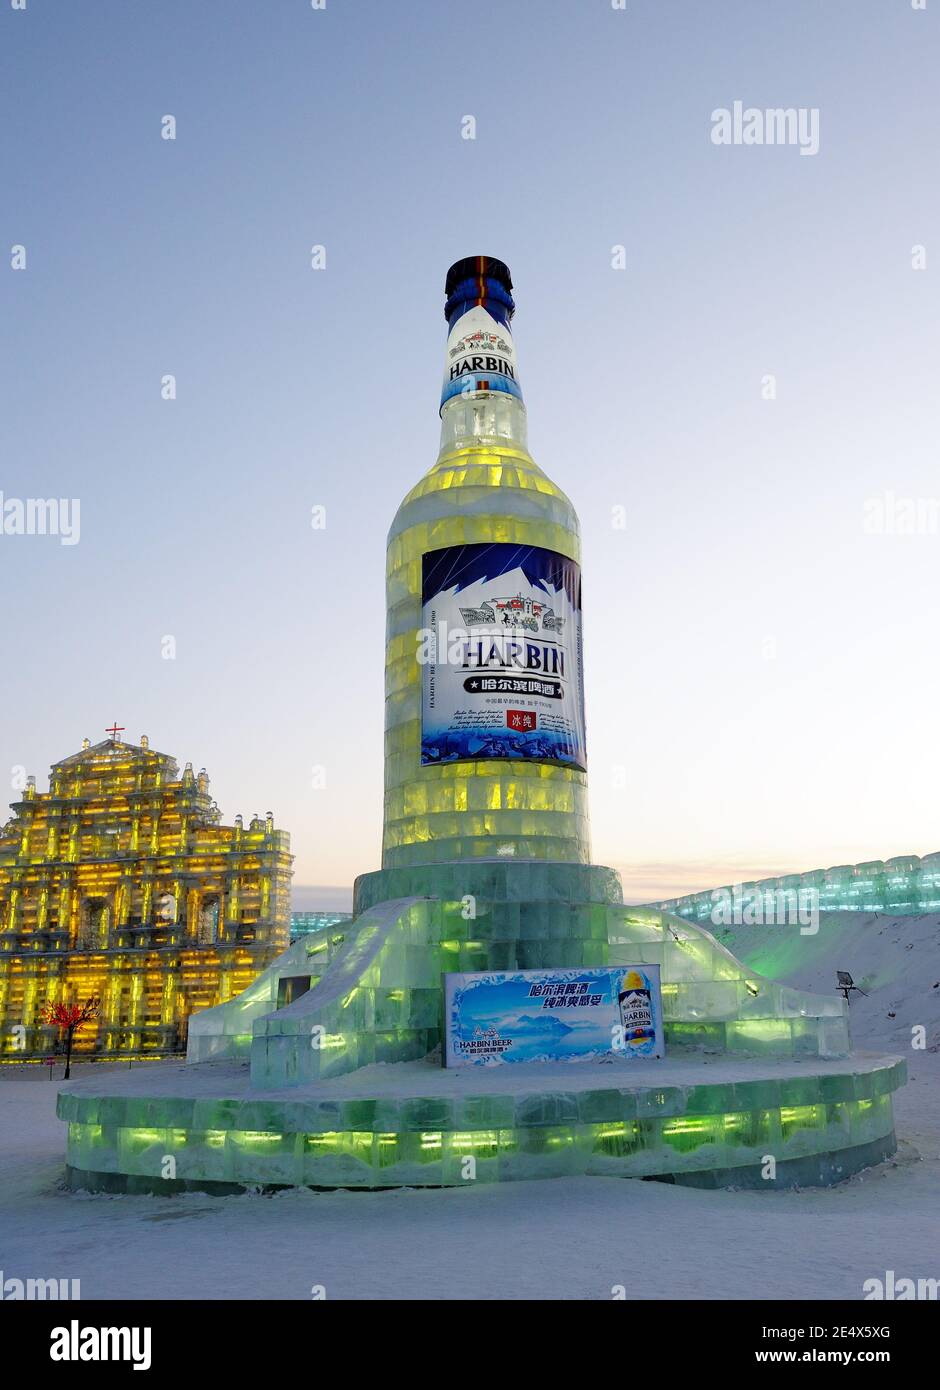 HARBIN,CHINA-JANUARY 30, 2010: Giant advertising bottle of Chinese brand of beer at Harbin Ice & Snow World Festival Stock Photo